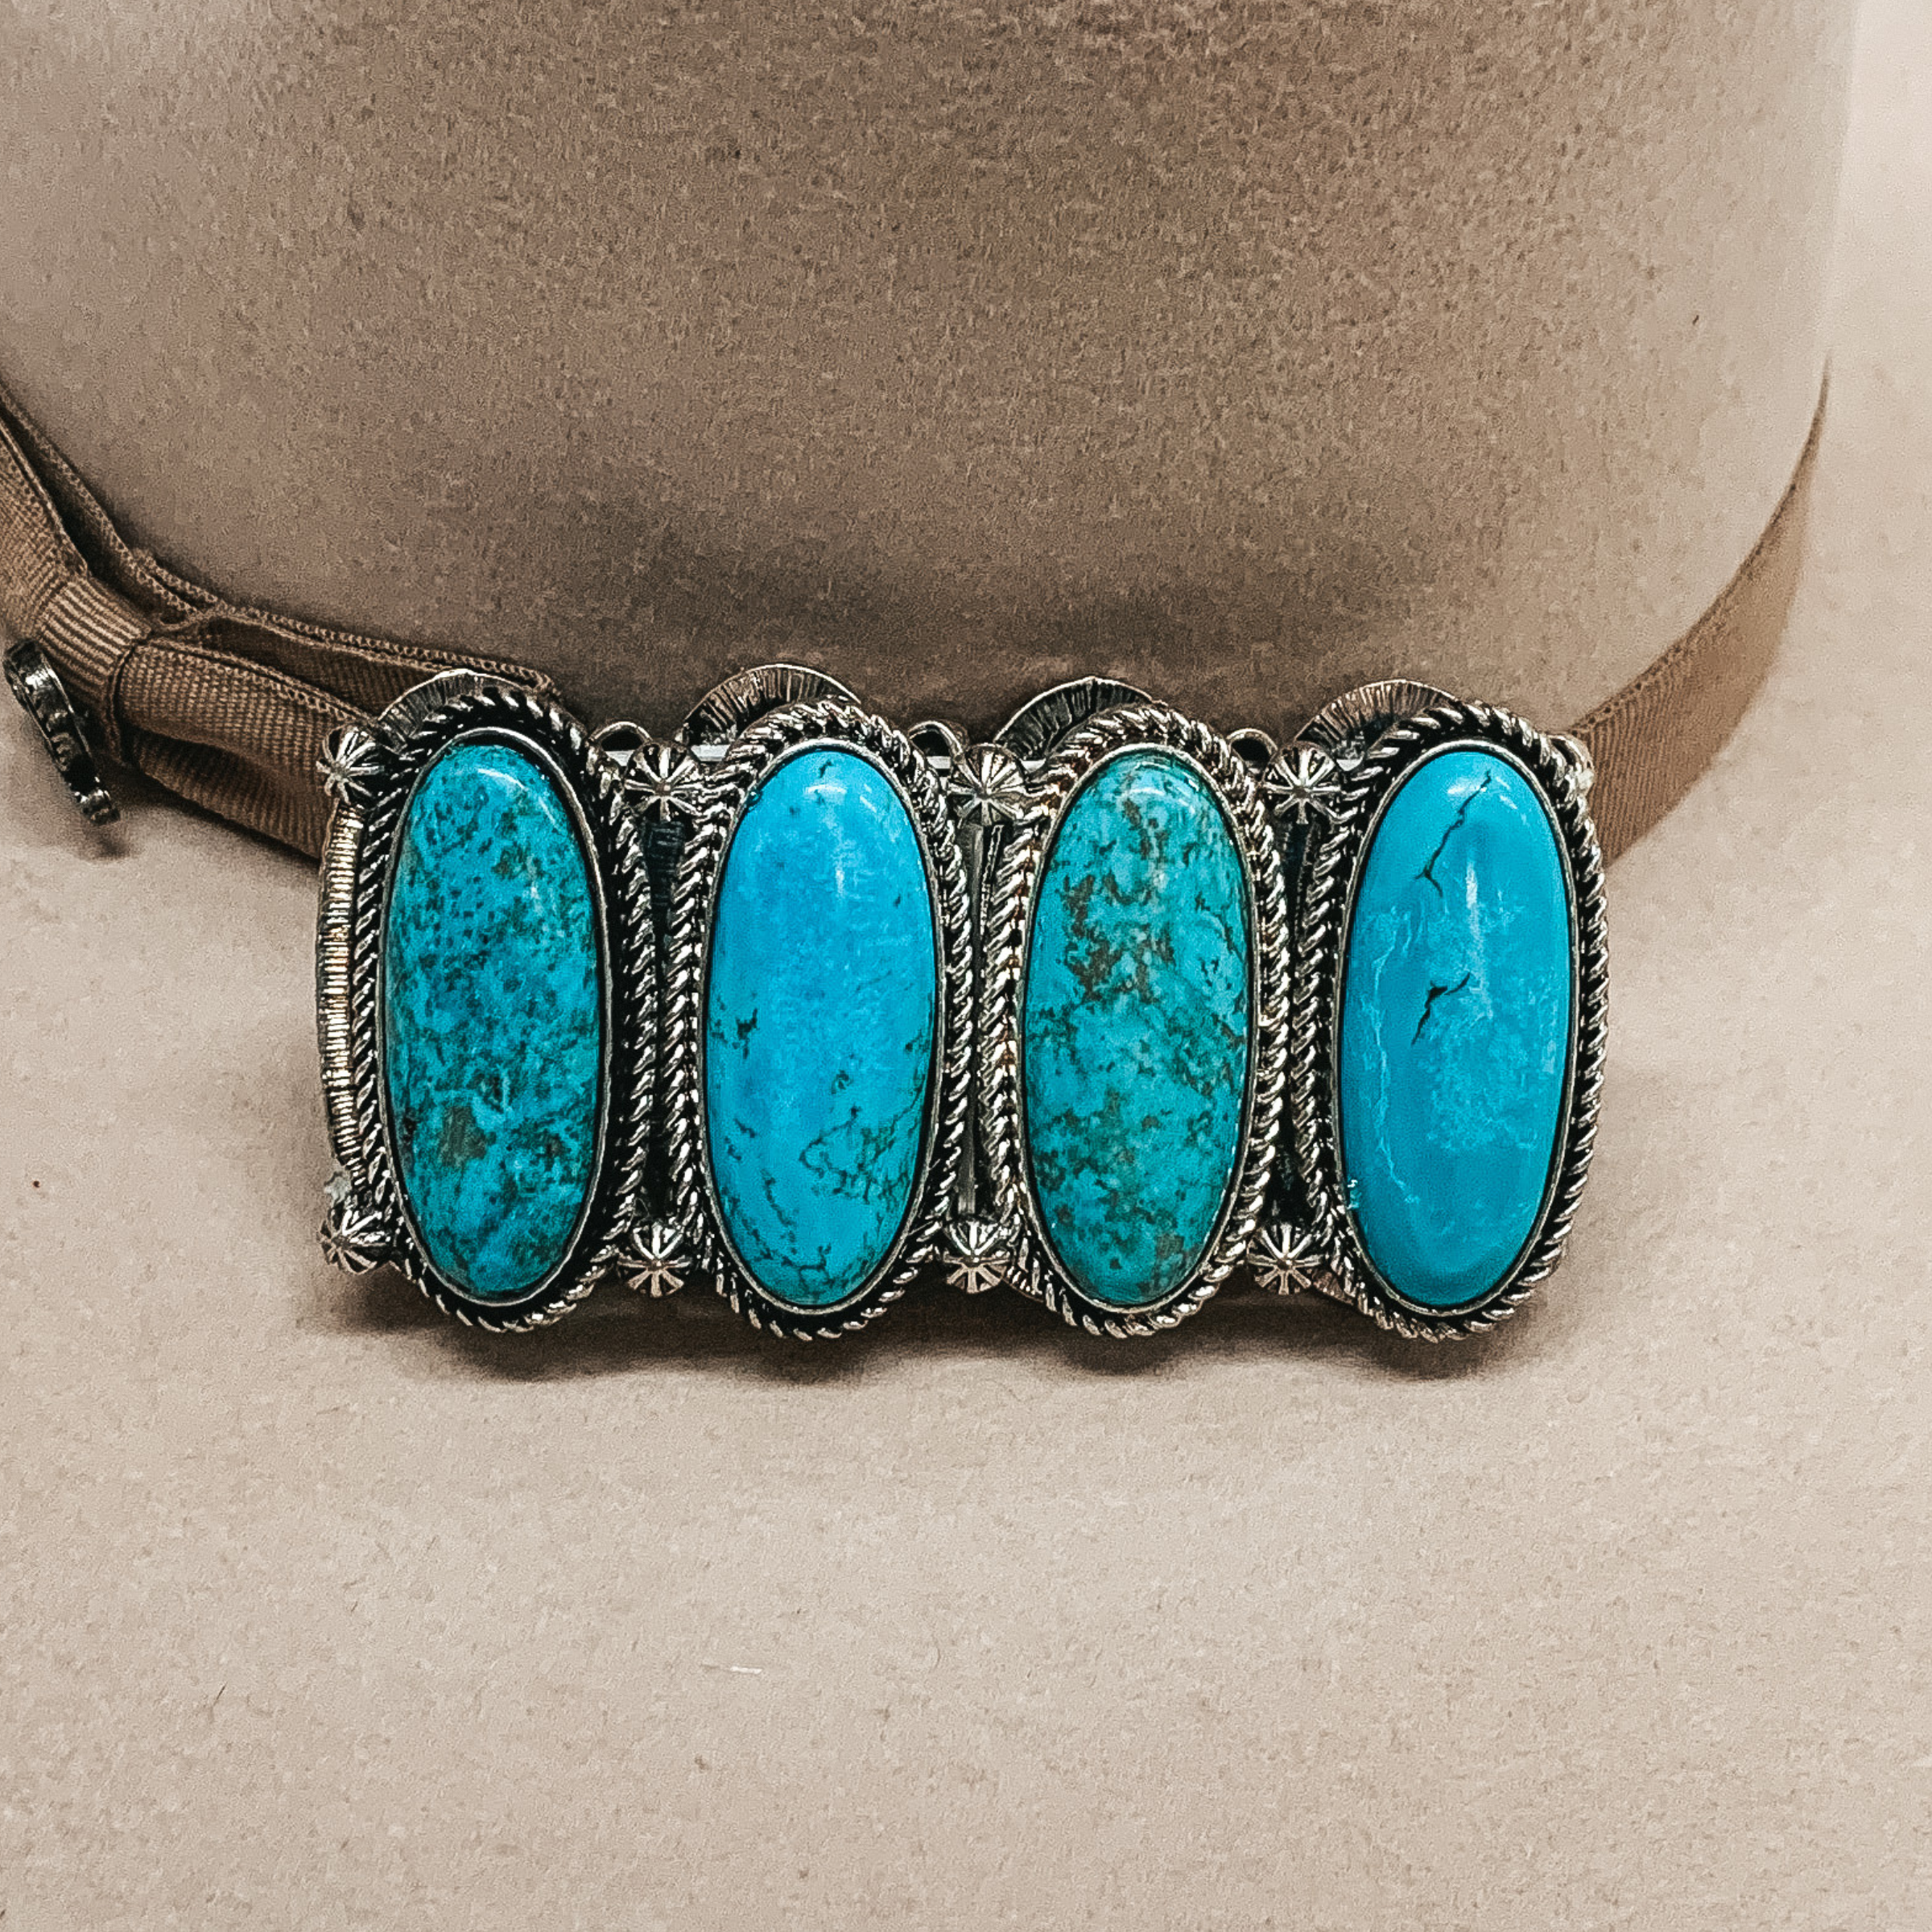 Silver bracelet with big oval turquoise stones pictured laying on a beige background.